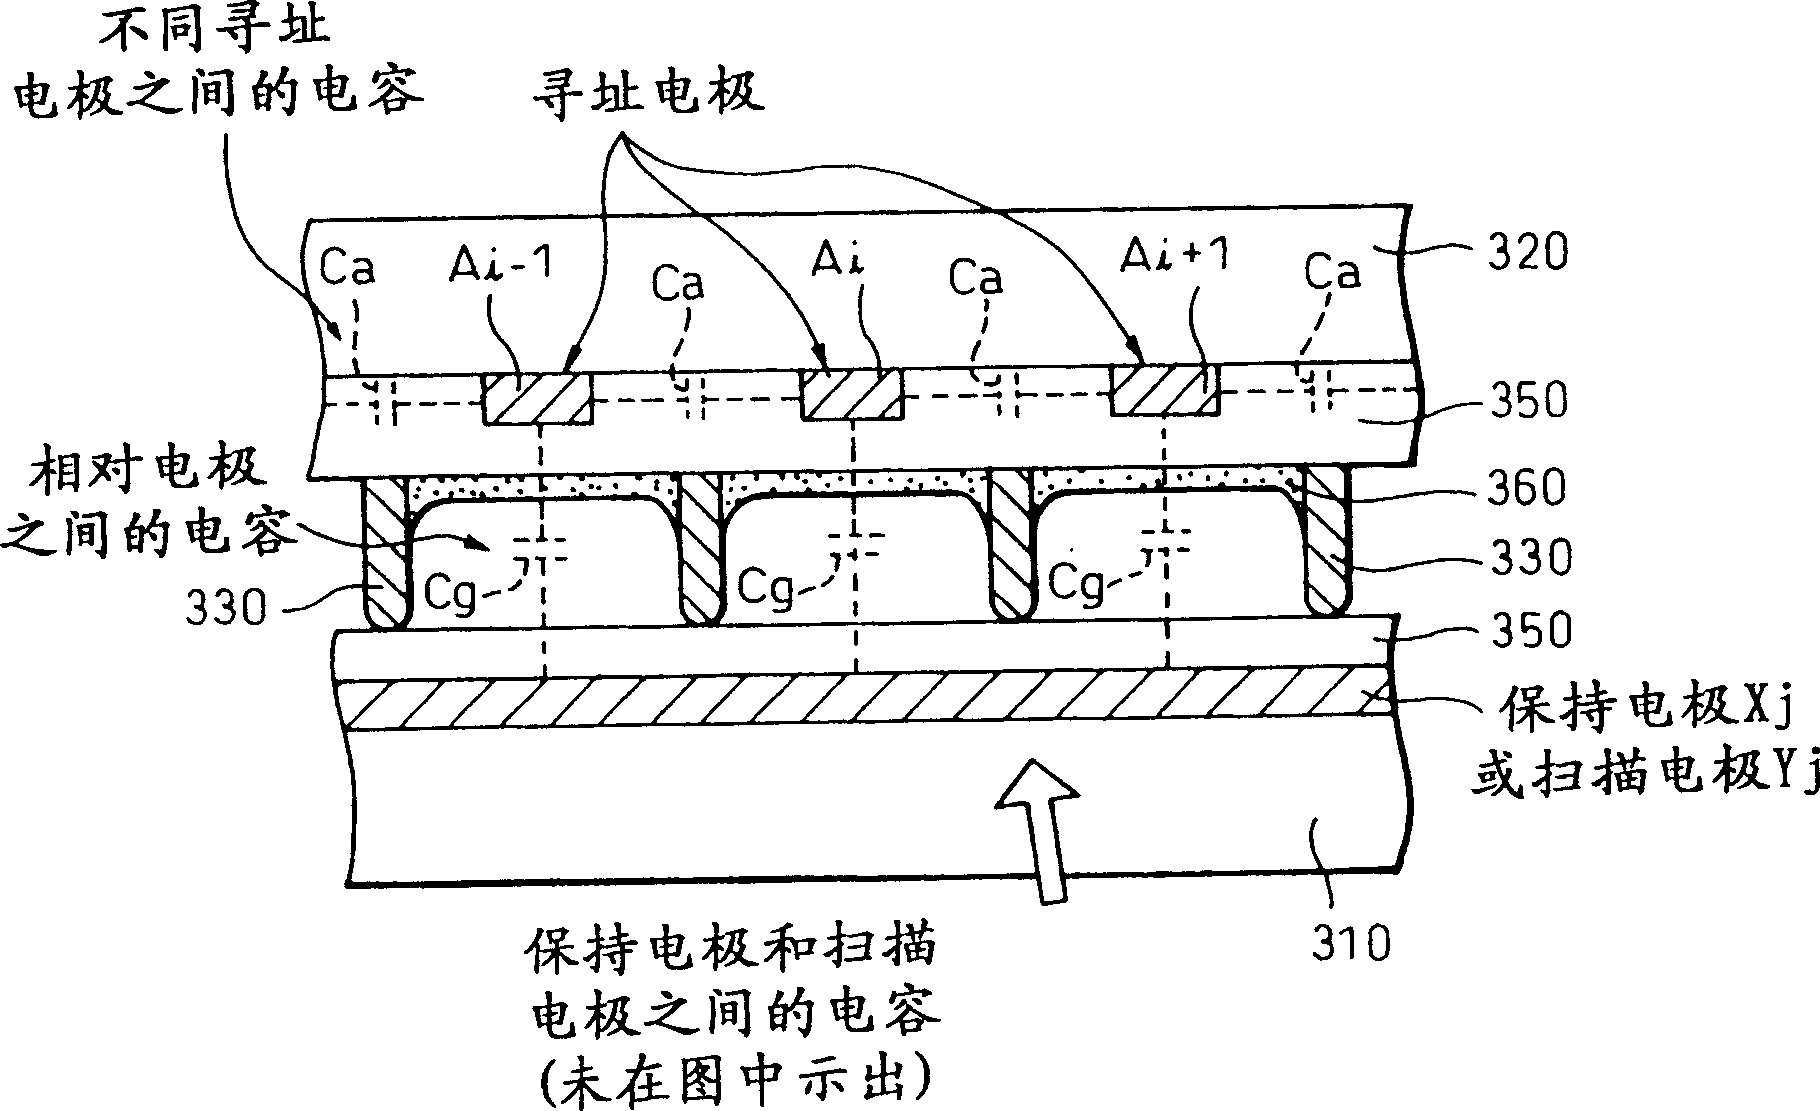 Assembly for mounting driver IC